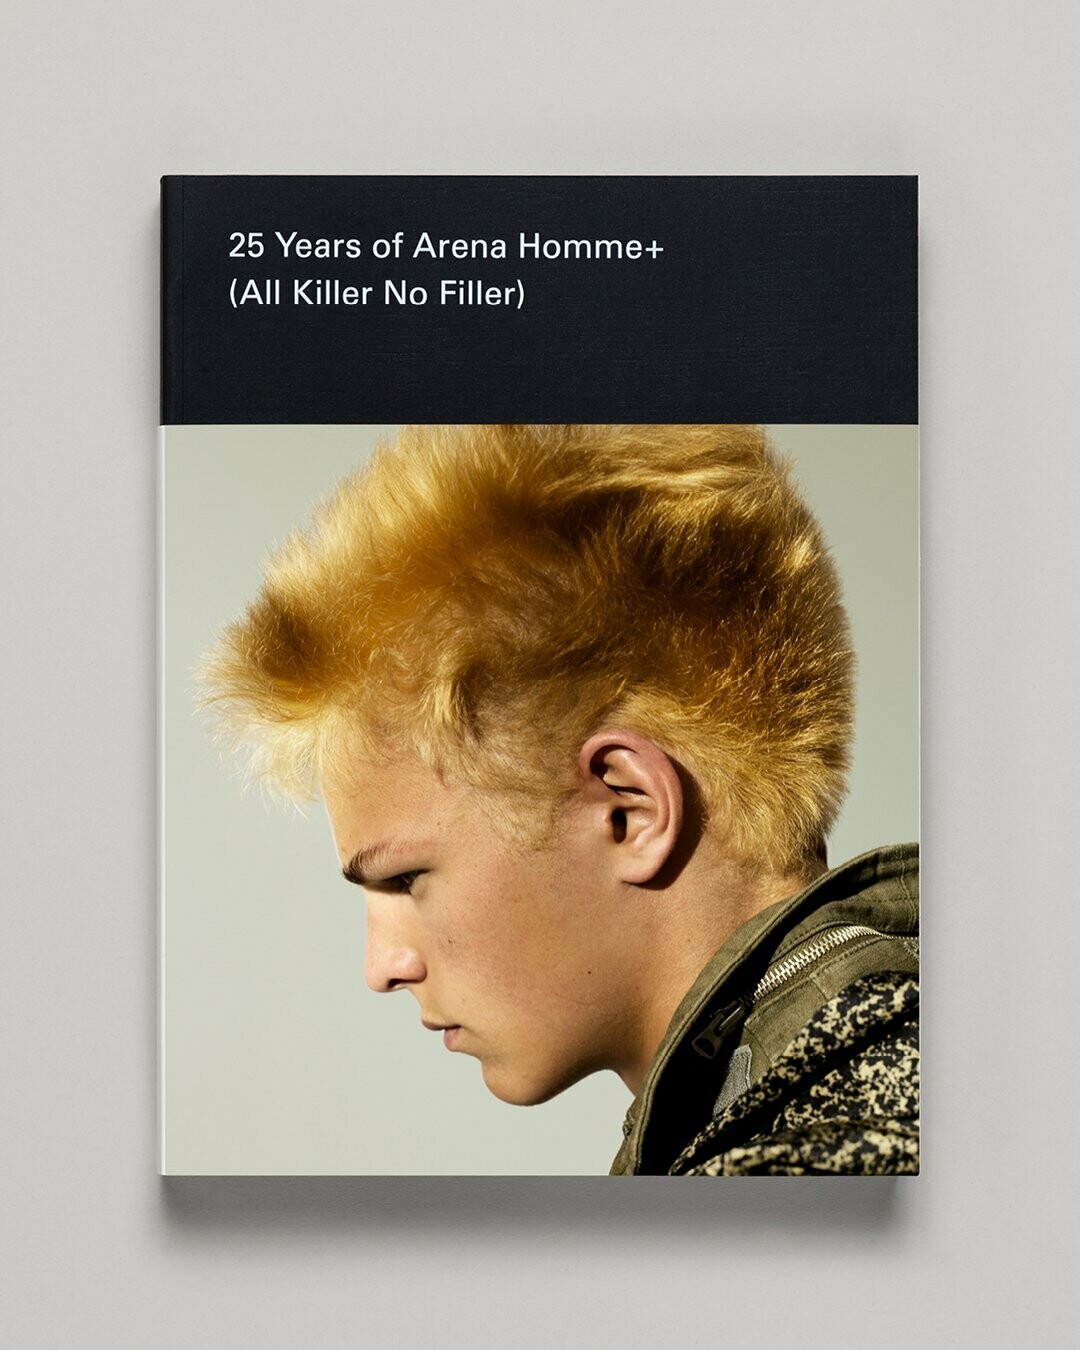 25 Years of Arena Homme + (All Killer, No Filler)